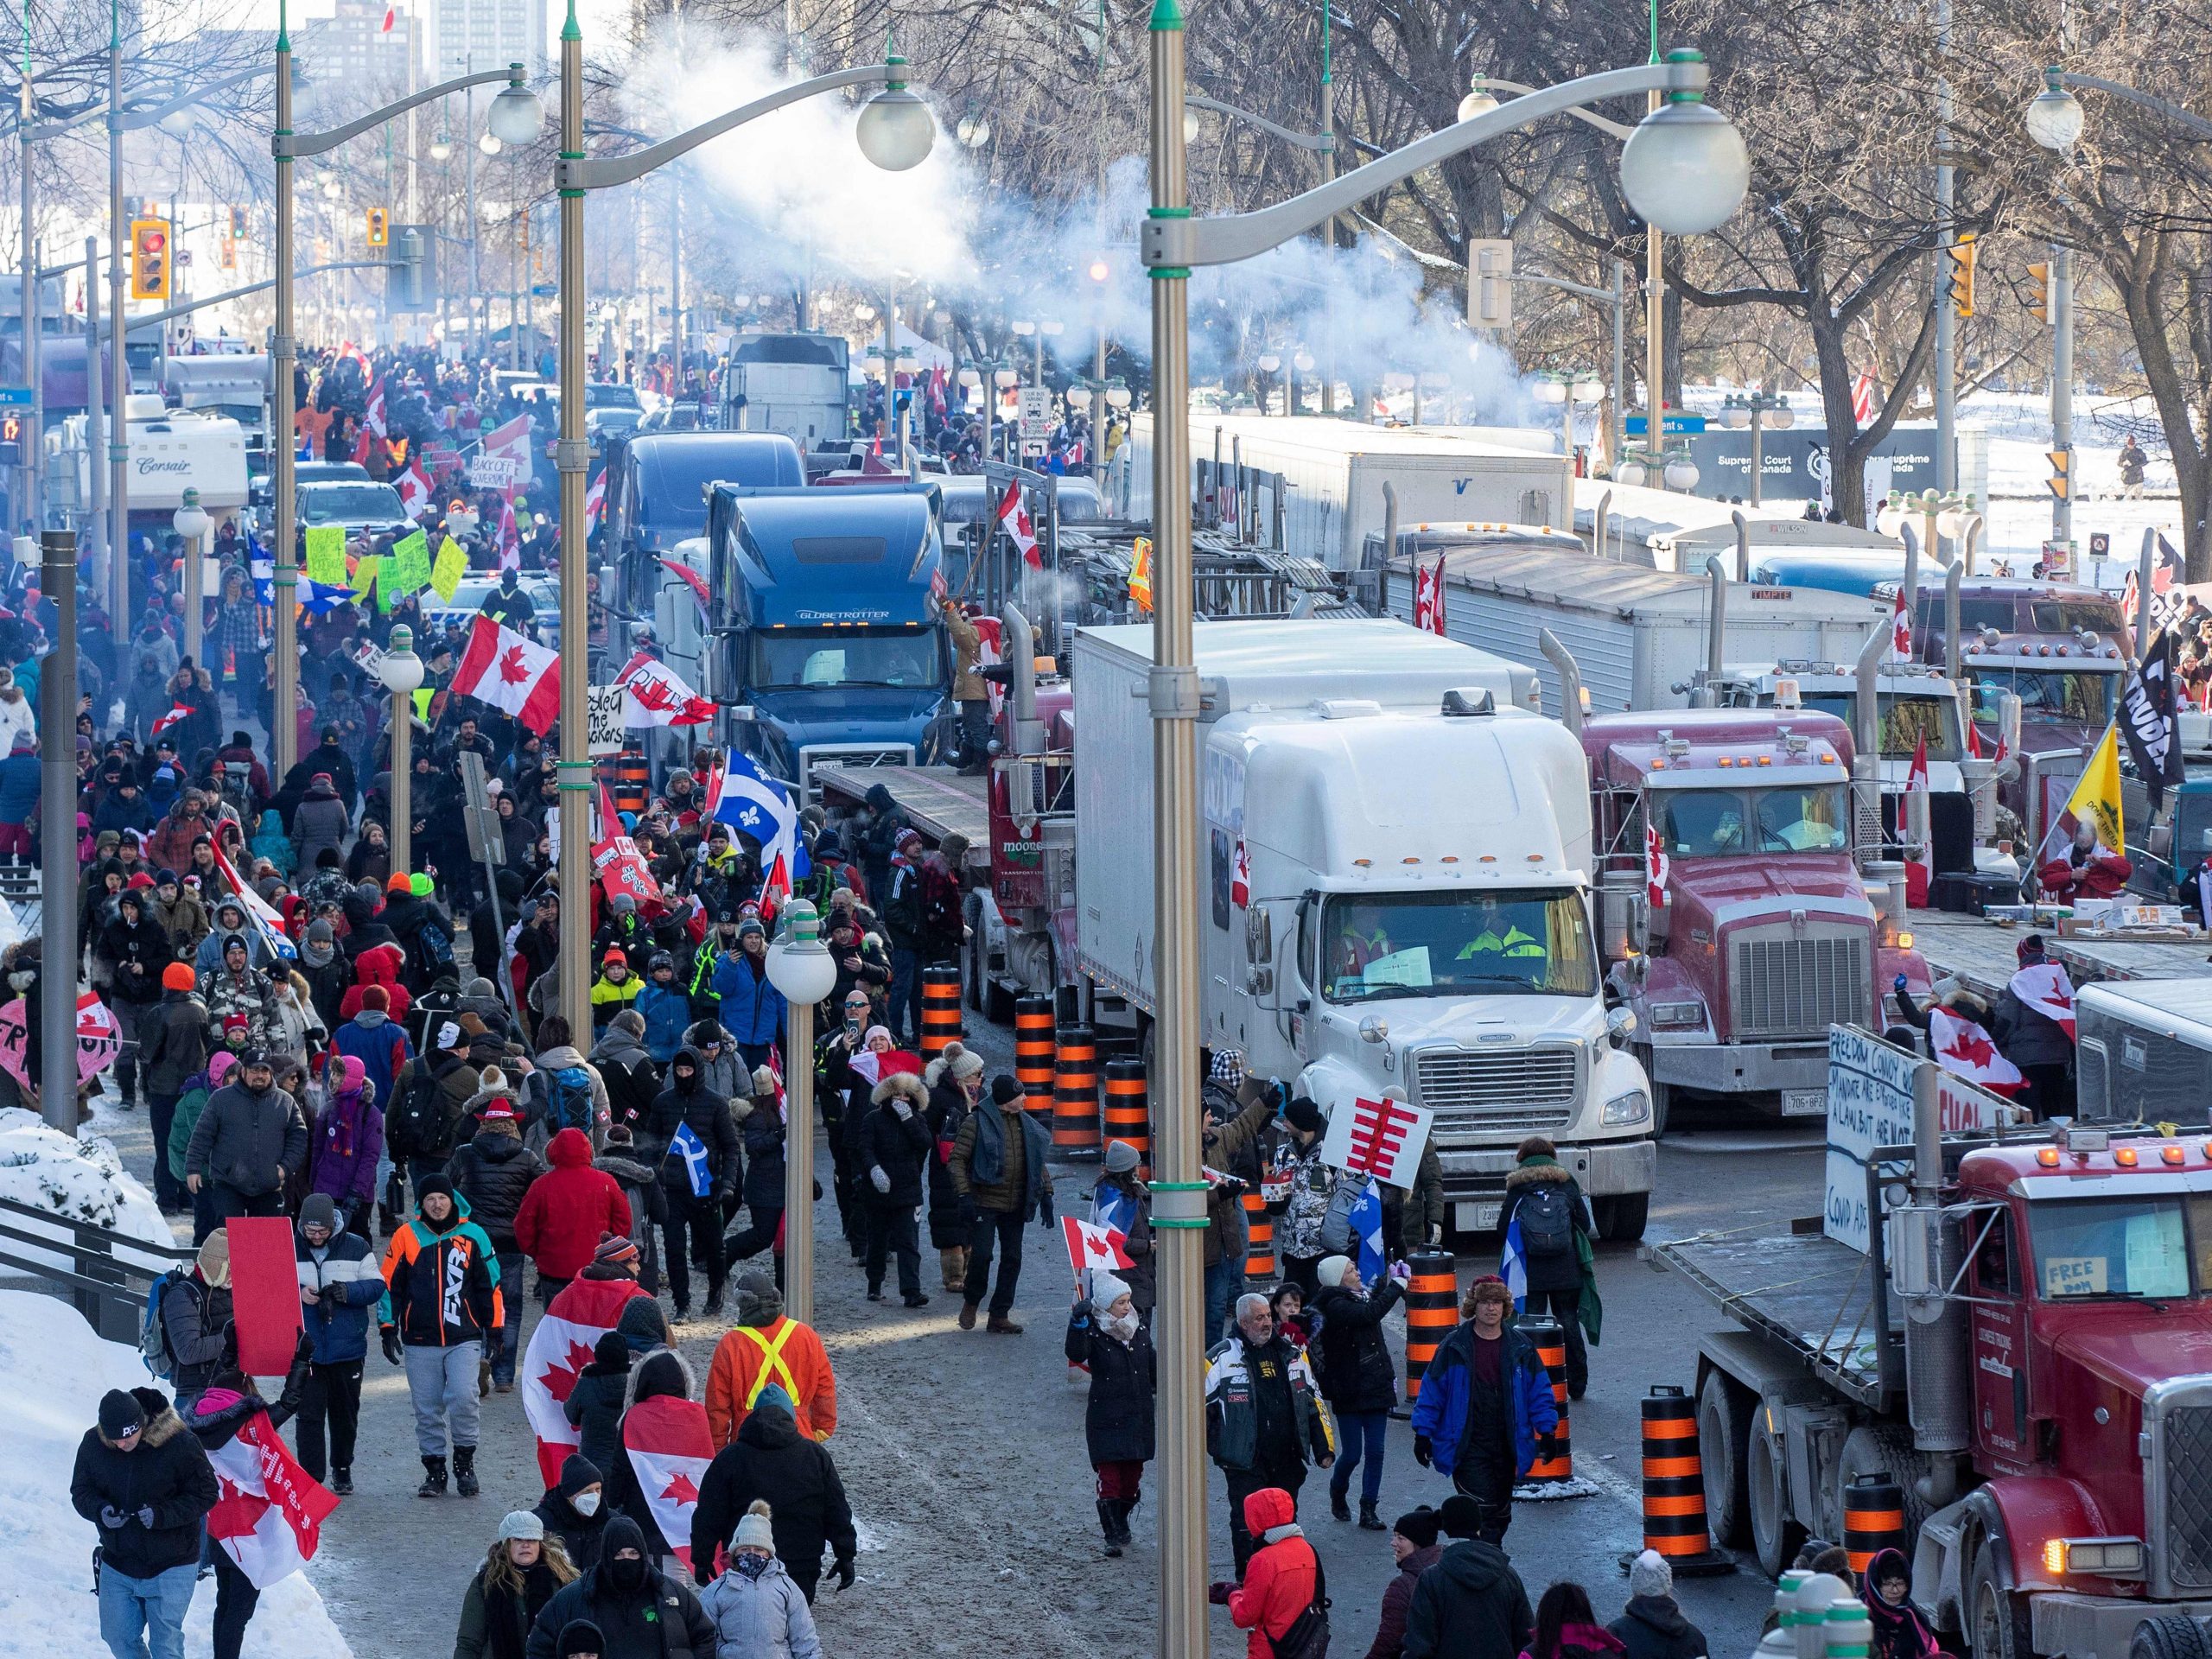 Supporters and trucks fill the street at Parliament Hill for the Freedom Truck Convoy to protest against Covid-19 vaccine mandates and restrictions in Ottawa, Canada, on January 29, 2022.